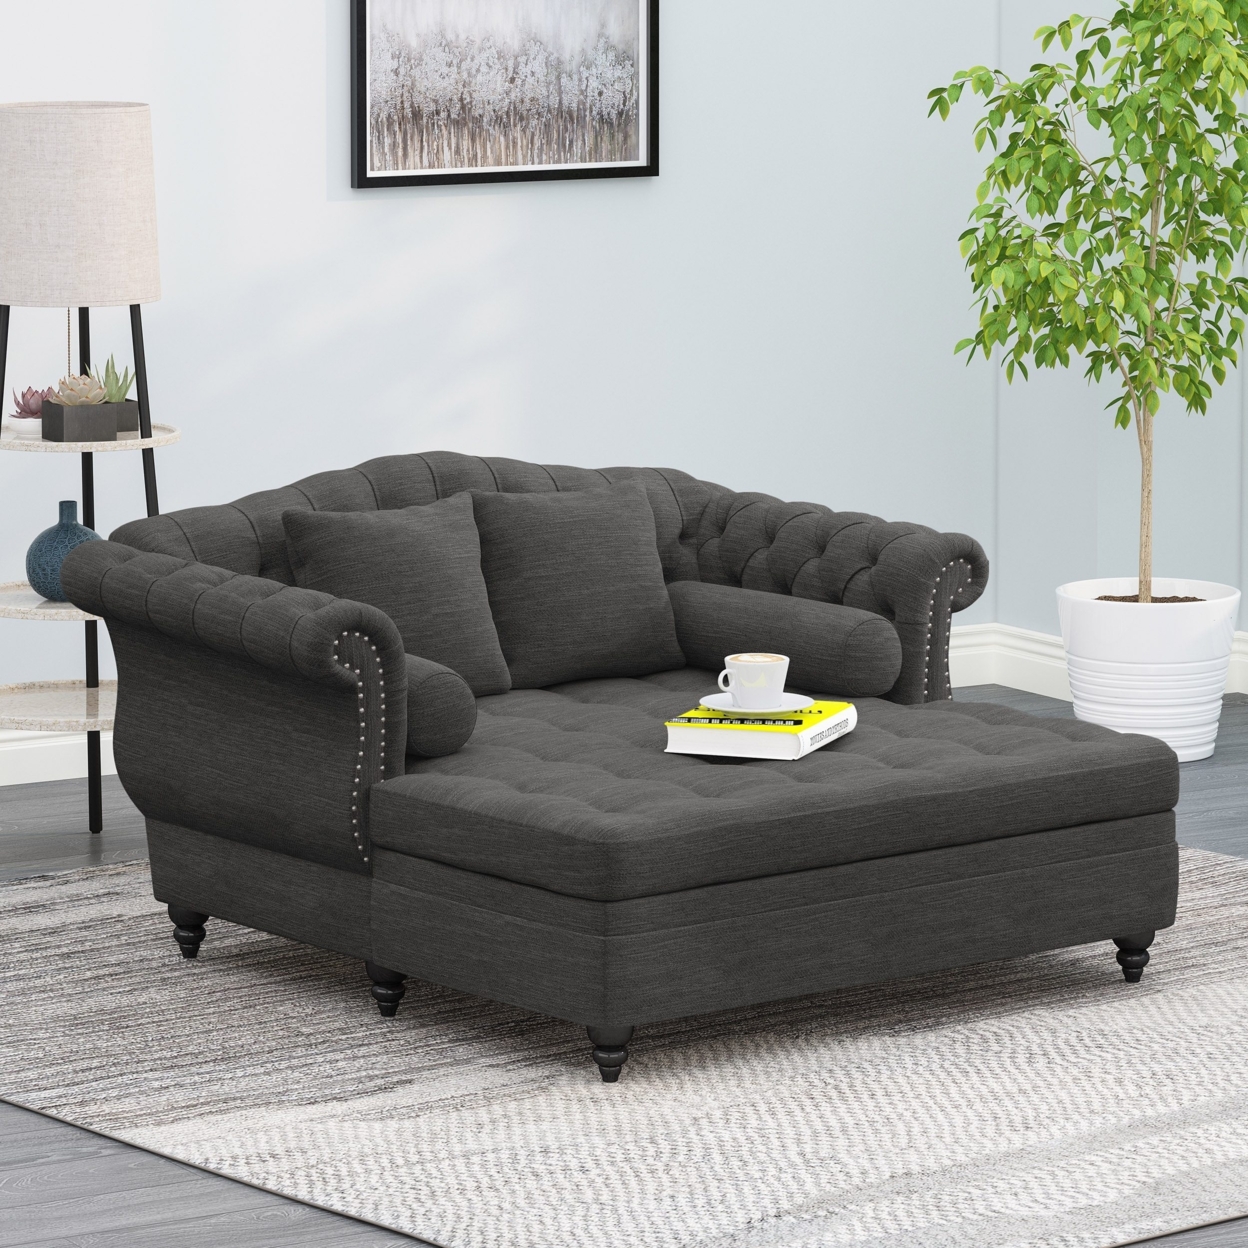 Horeb Contemporary Tufted Double Chaise Lounge With Accent Pillows - Dark Brown/charcoal